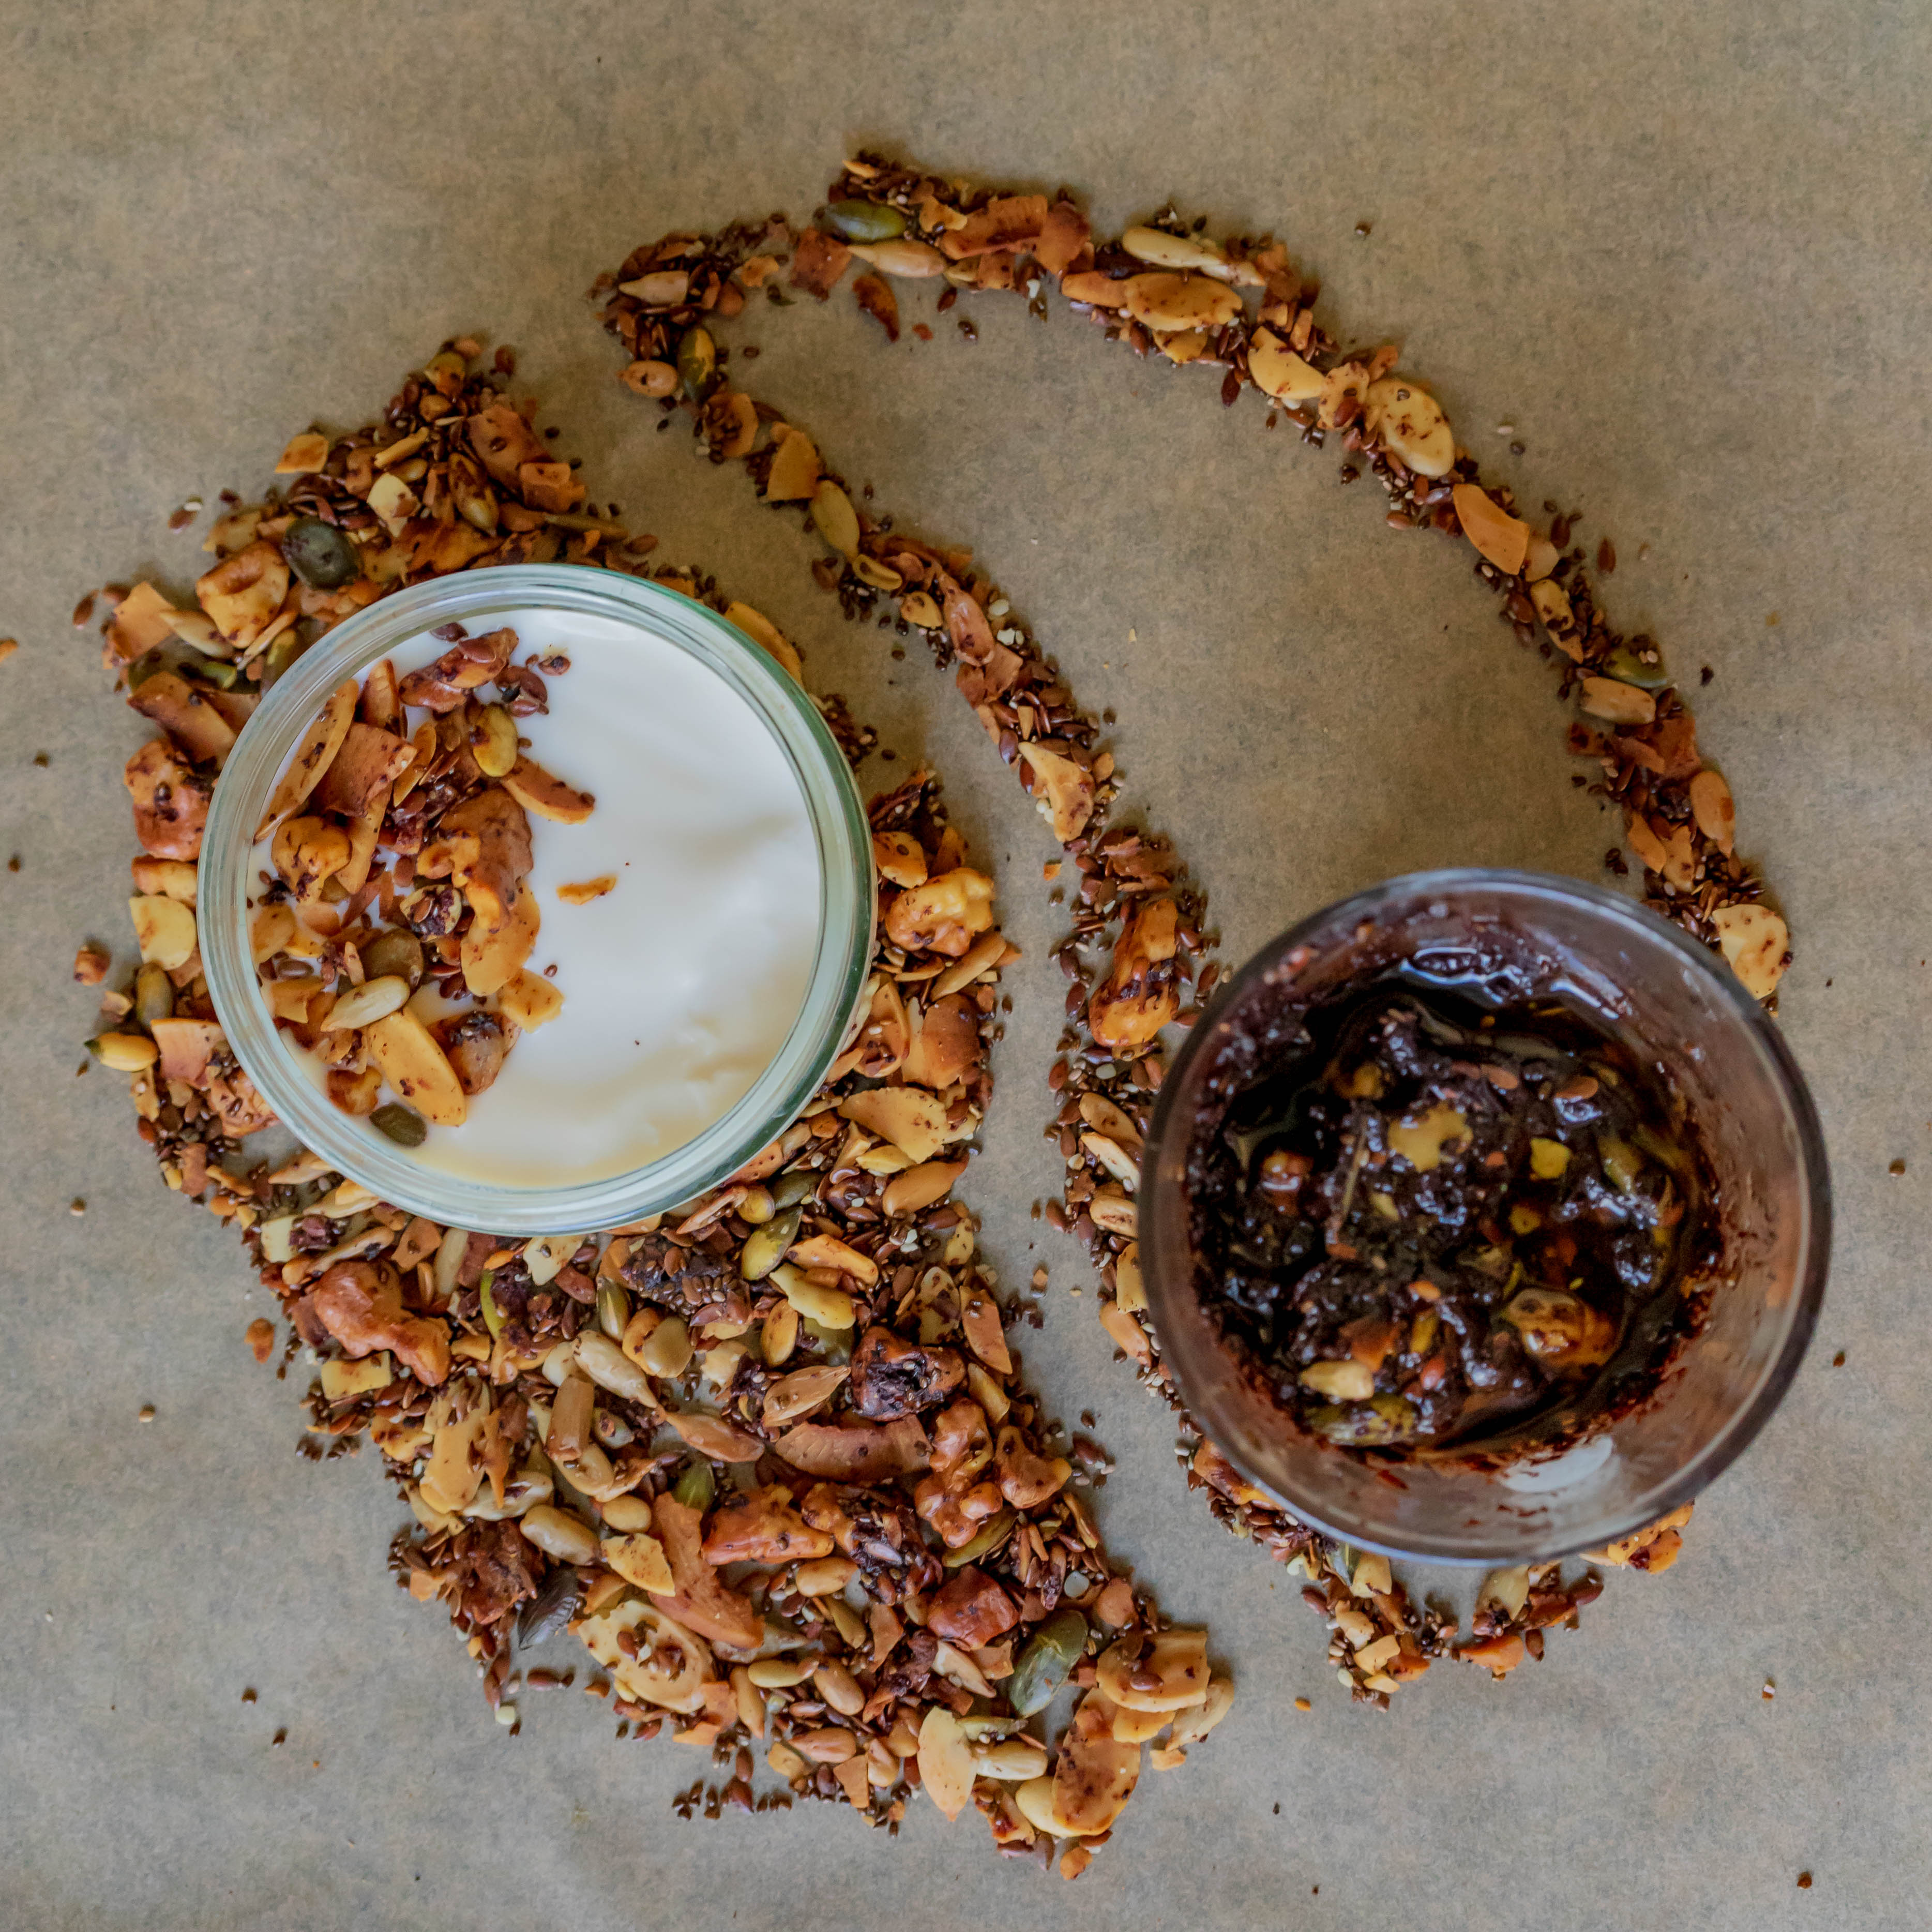 Crunchy granola made with the highest quality nuts, seeds and oils.